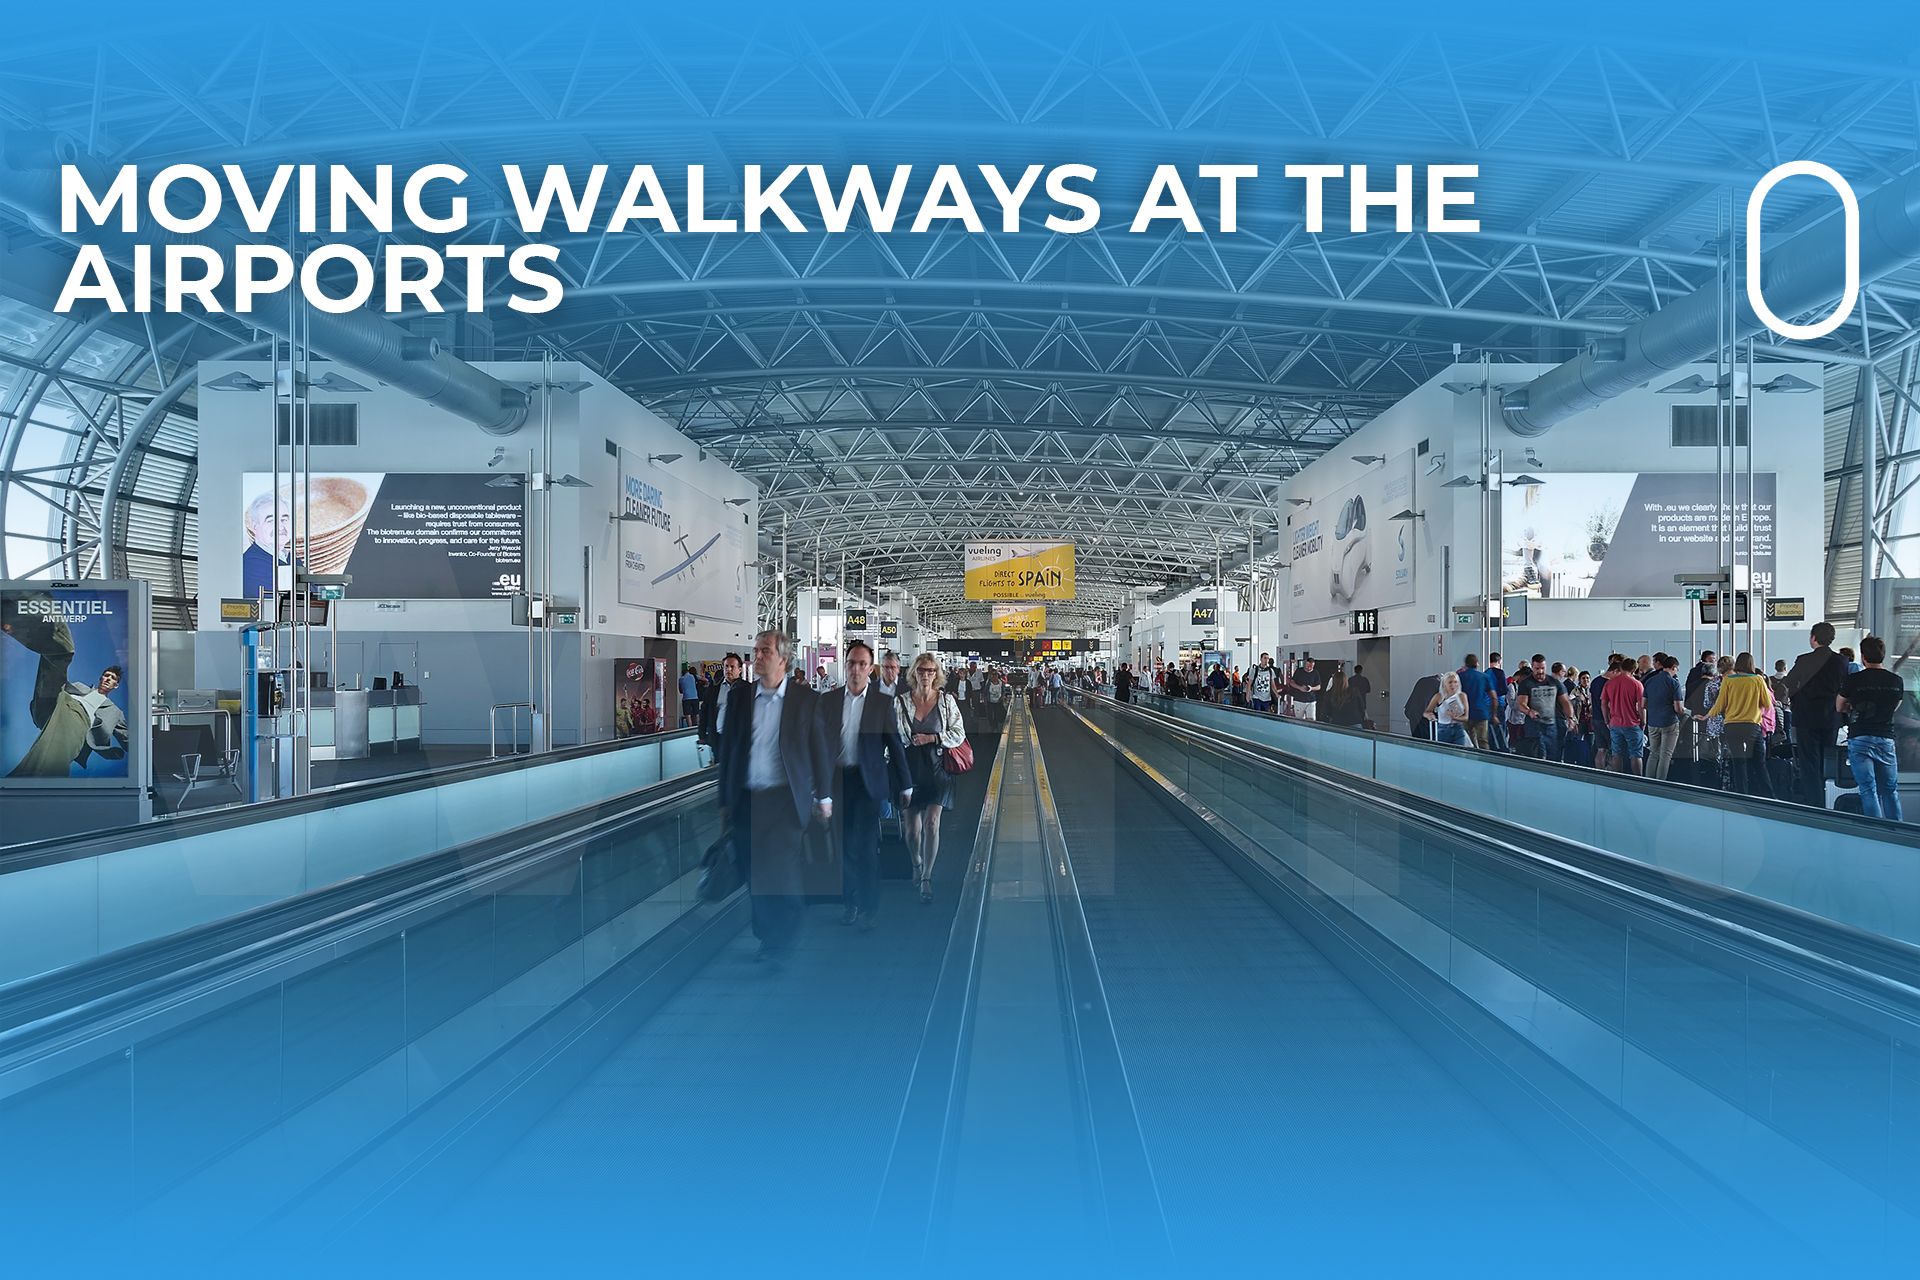 Why Do Airports Have Moving Walkways?